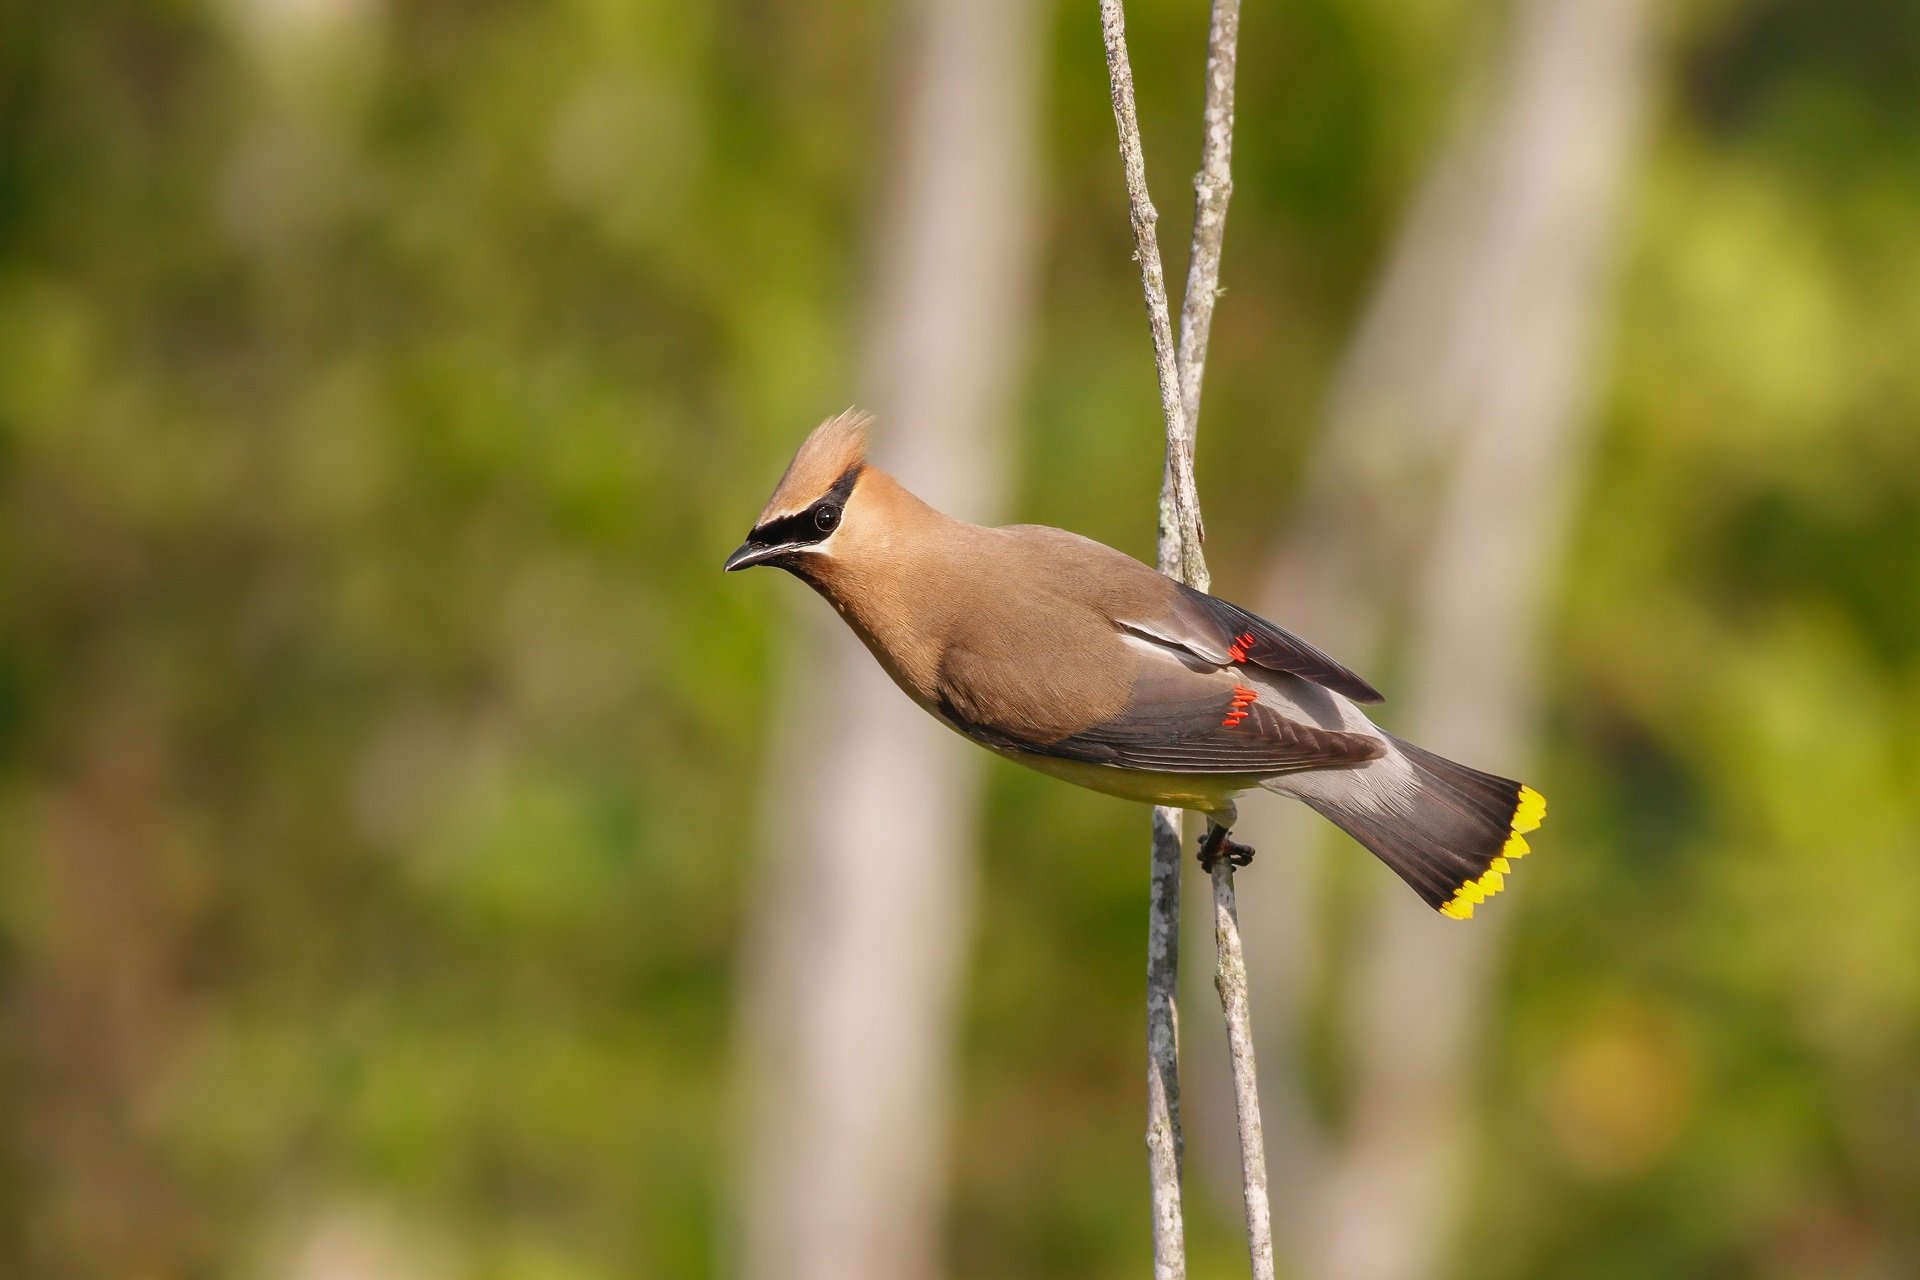 A Cedar Waxwing balances on a branch. The red-orange "waxwing" tips of its secondary feathers, as well as the bright yellow tip of its tail, are visible.